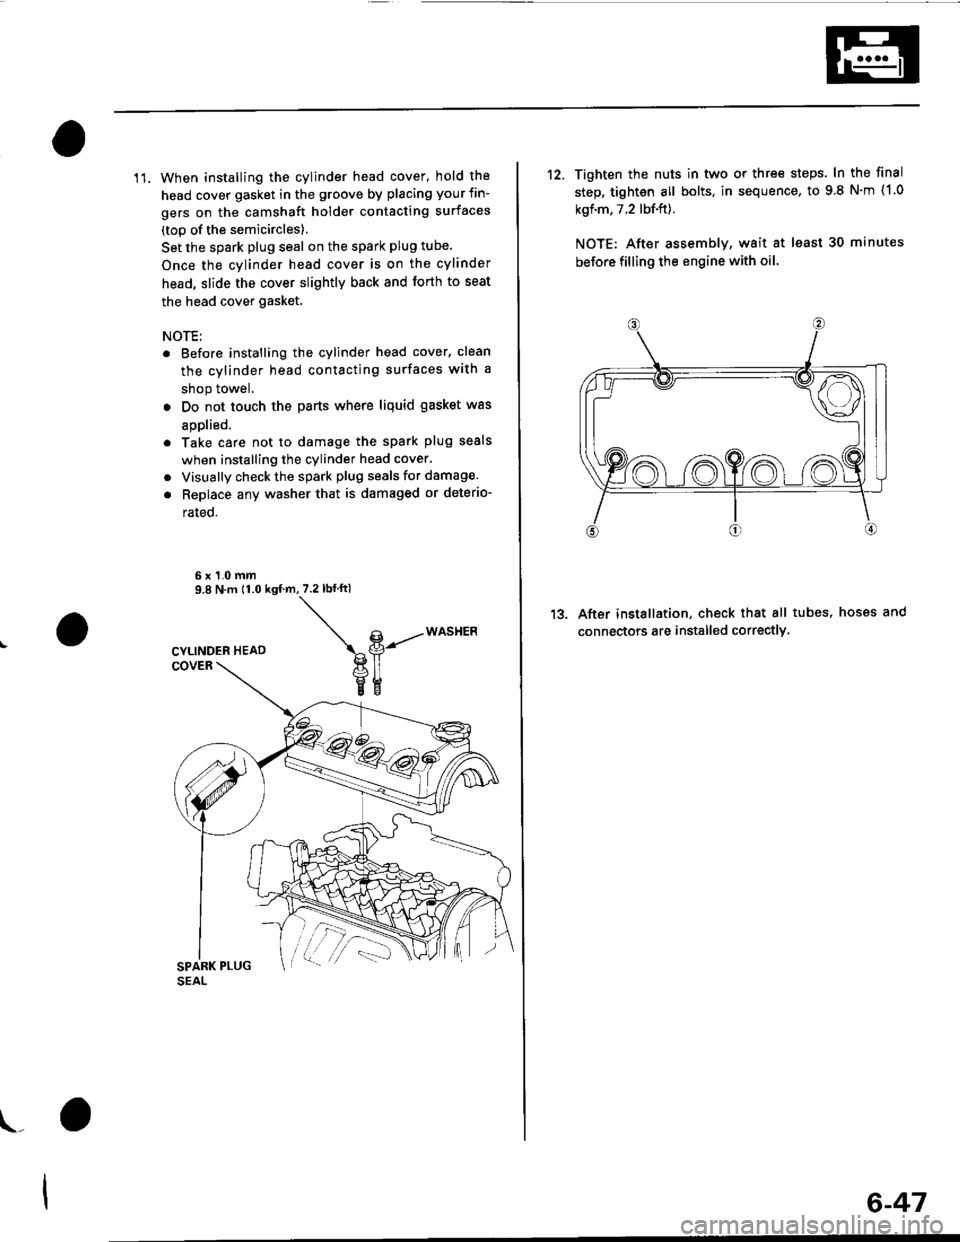 HONDA CIVIC 1999 6.G Workshop Manual 11. When installing the cylinder head cover, hold the
head cover gasket in the groove by placing your fin-
gers on the camshaft holder contacting surfaces
(top of the semicircles)
Set the spark plug s